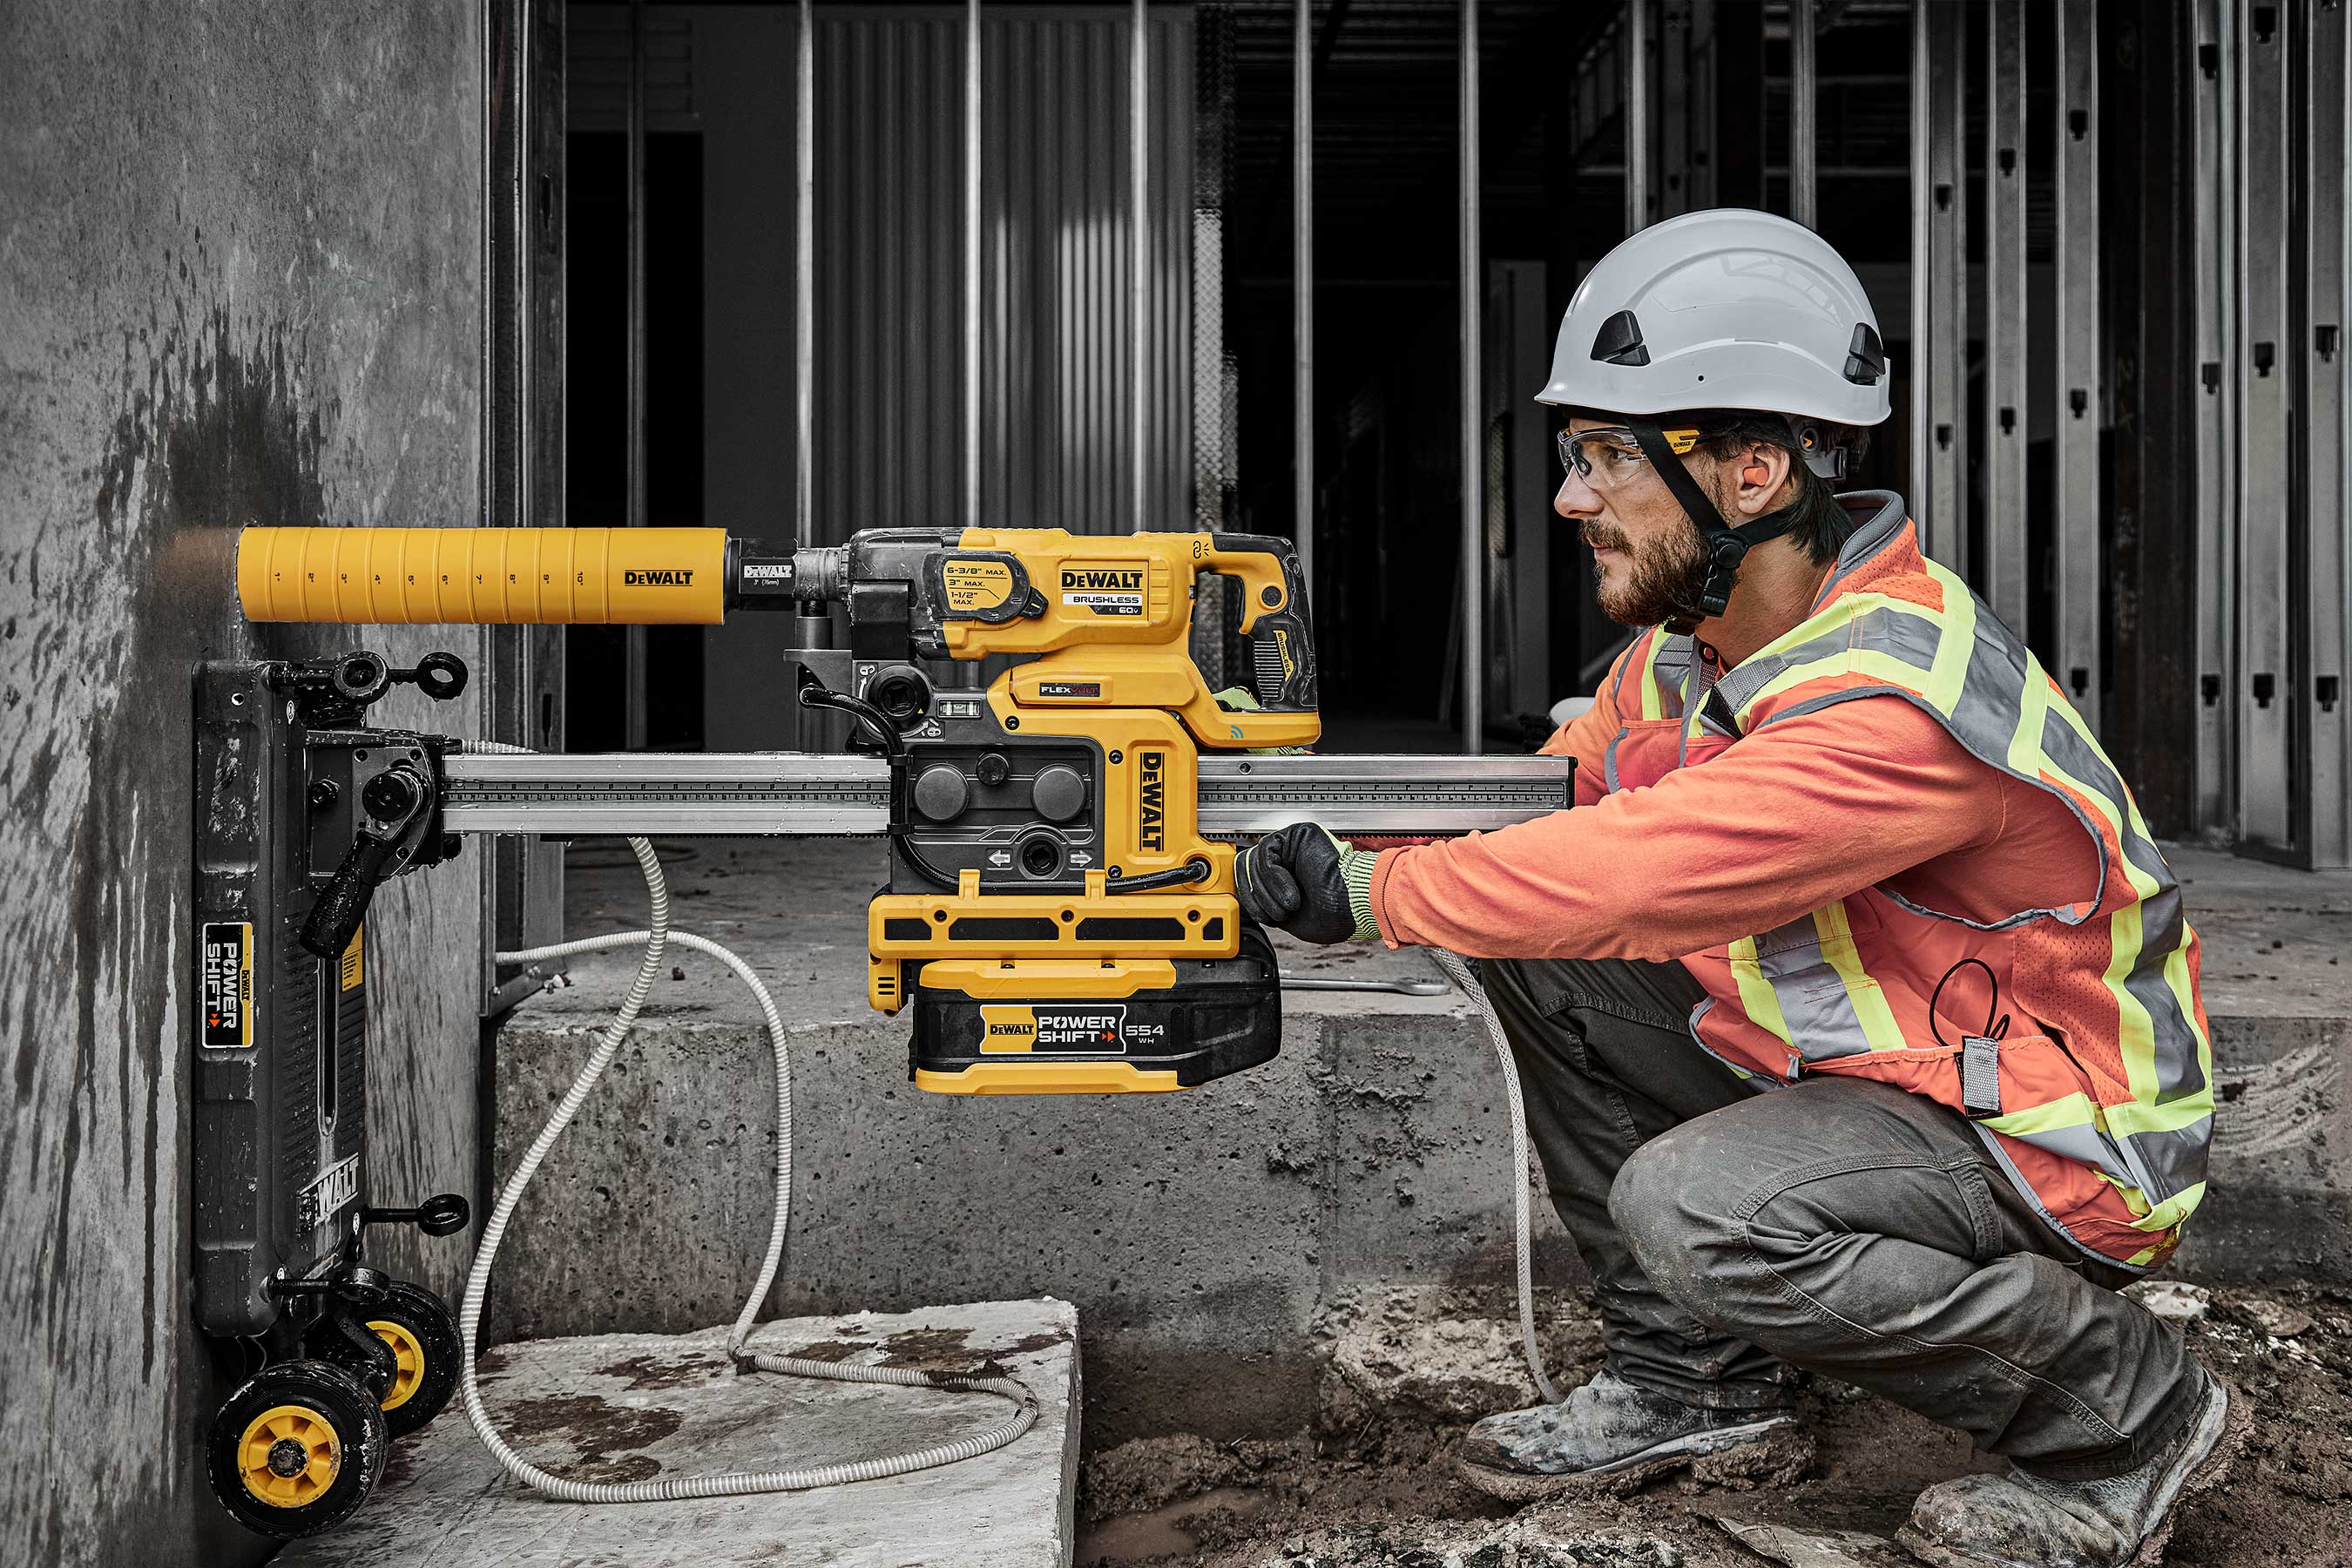 The DEWALT POWERSHIFT™ Core Drill & Stand are designed with close wall or ceiling clearance. Part of the DEWALT PERFORM & PROTECT™ line of tools, the drill features anti-rotation technology to prevent over rotation in a bind up situation.